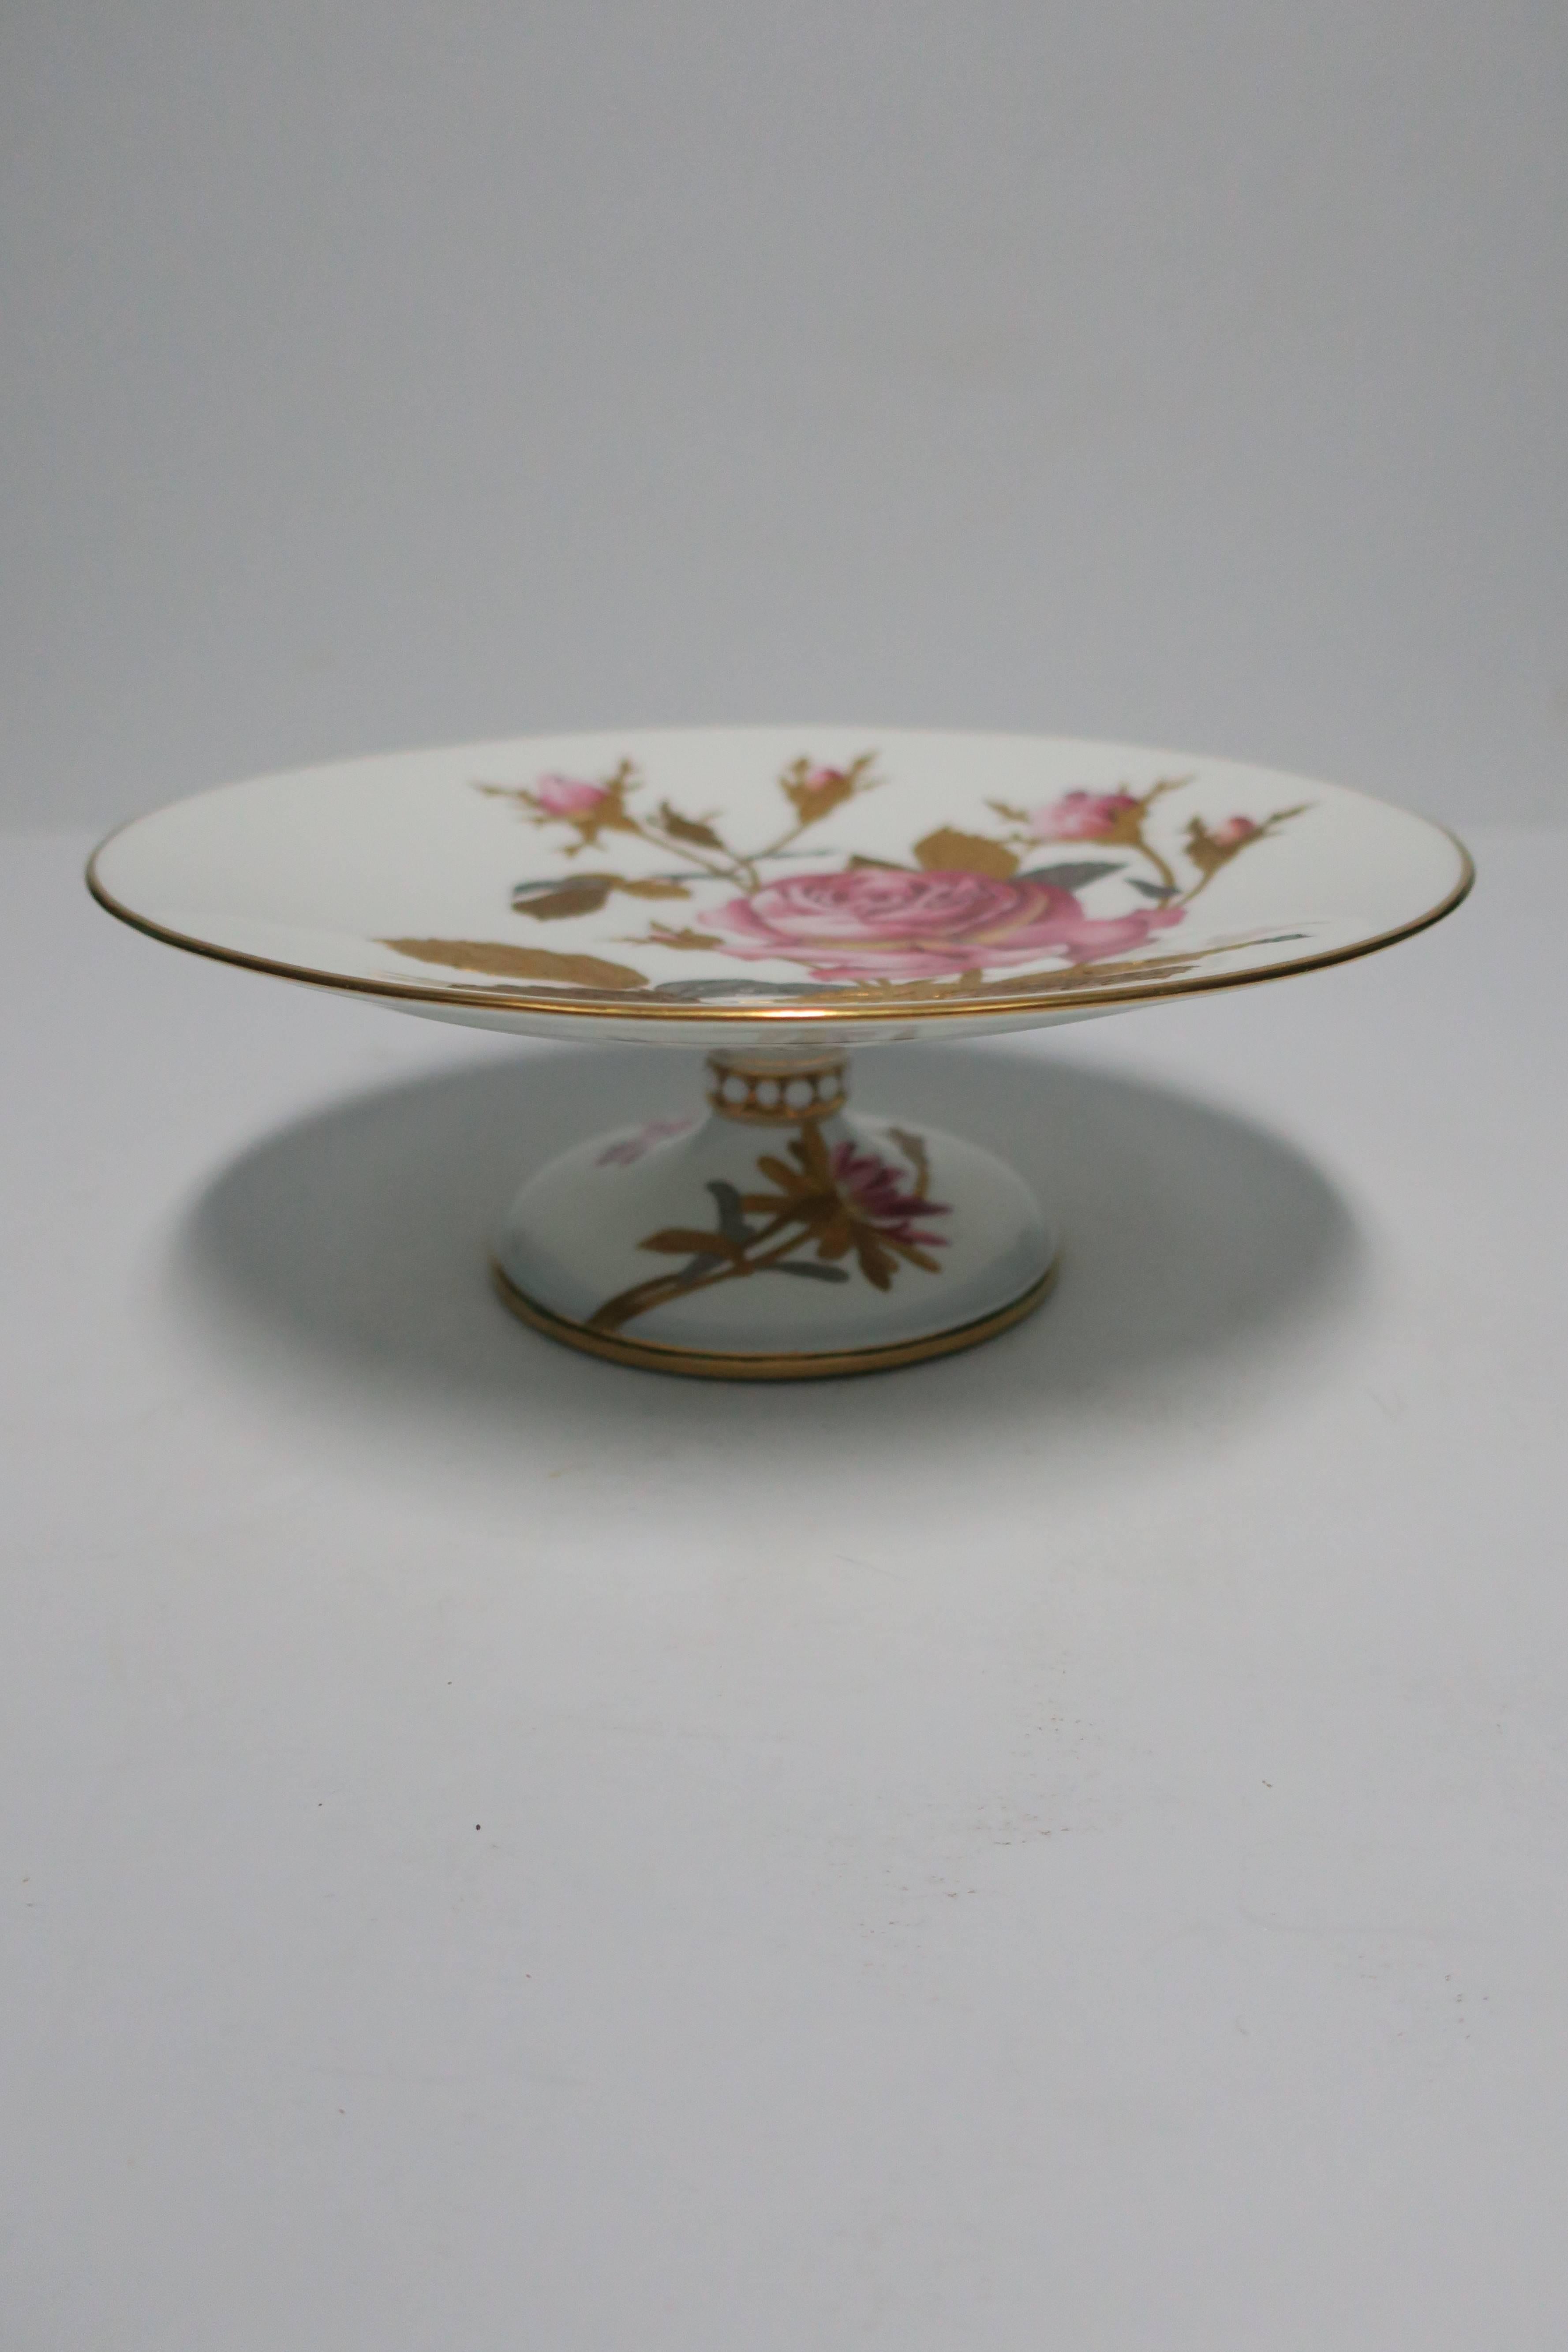 German European White Porcelain Pedestal Dessert Plate with Pink Roses and Gold Leaves For Sale